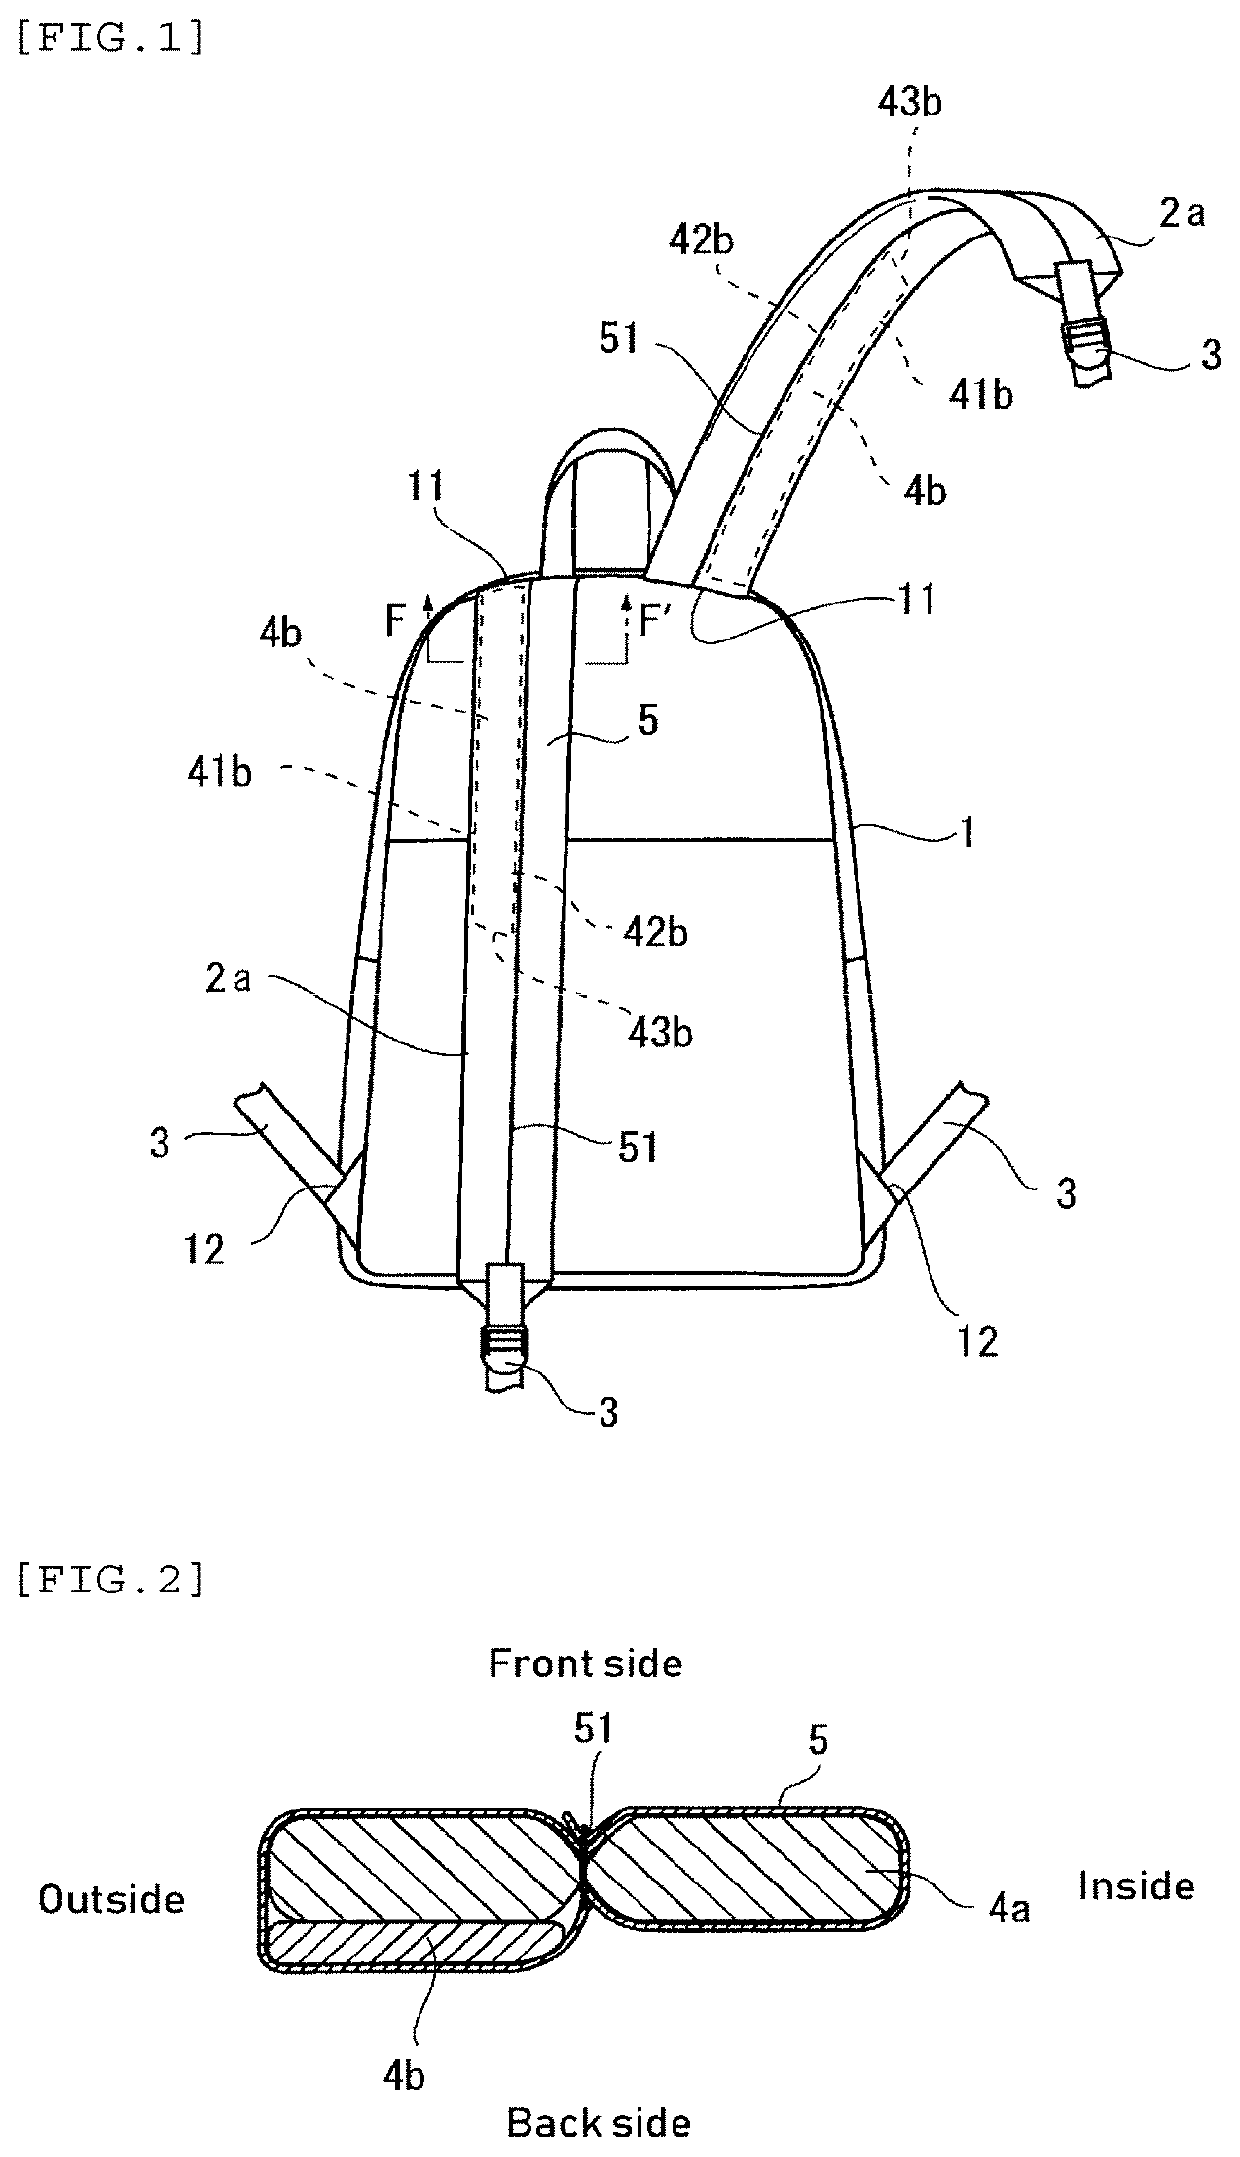 Shoulder straps for backpack and backpack provided with same